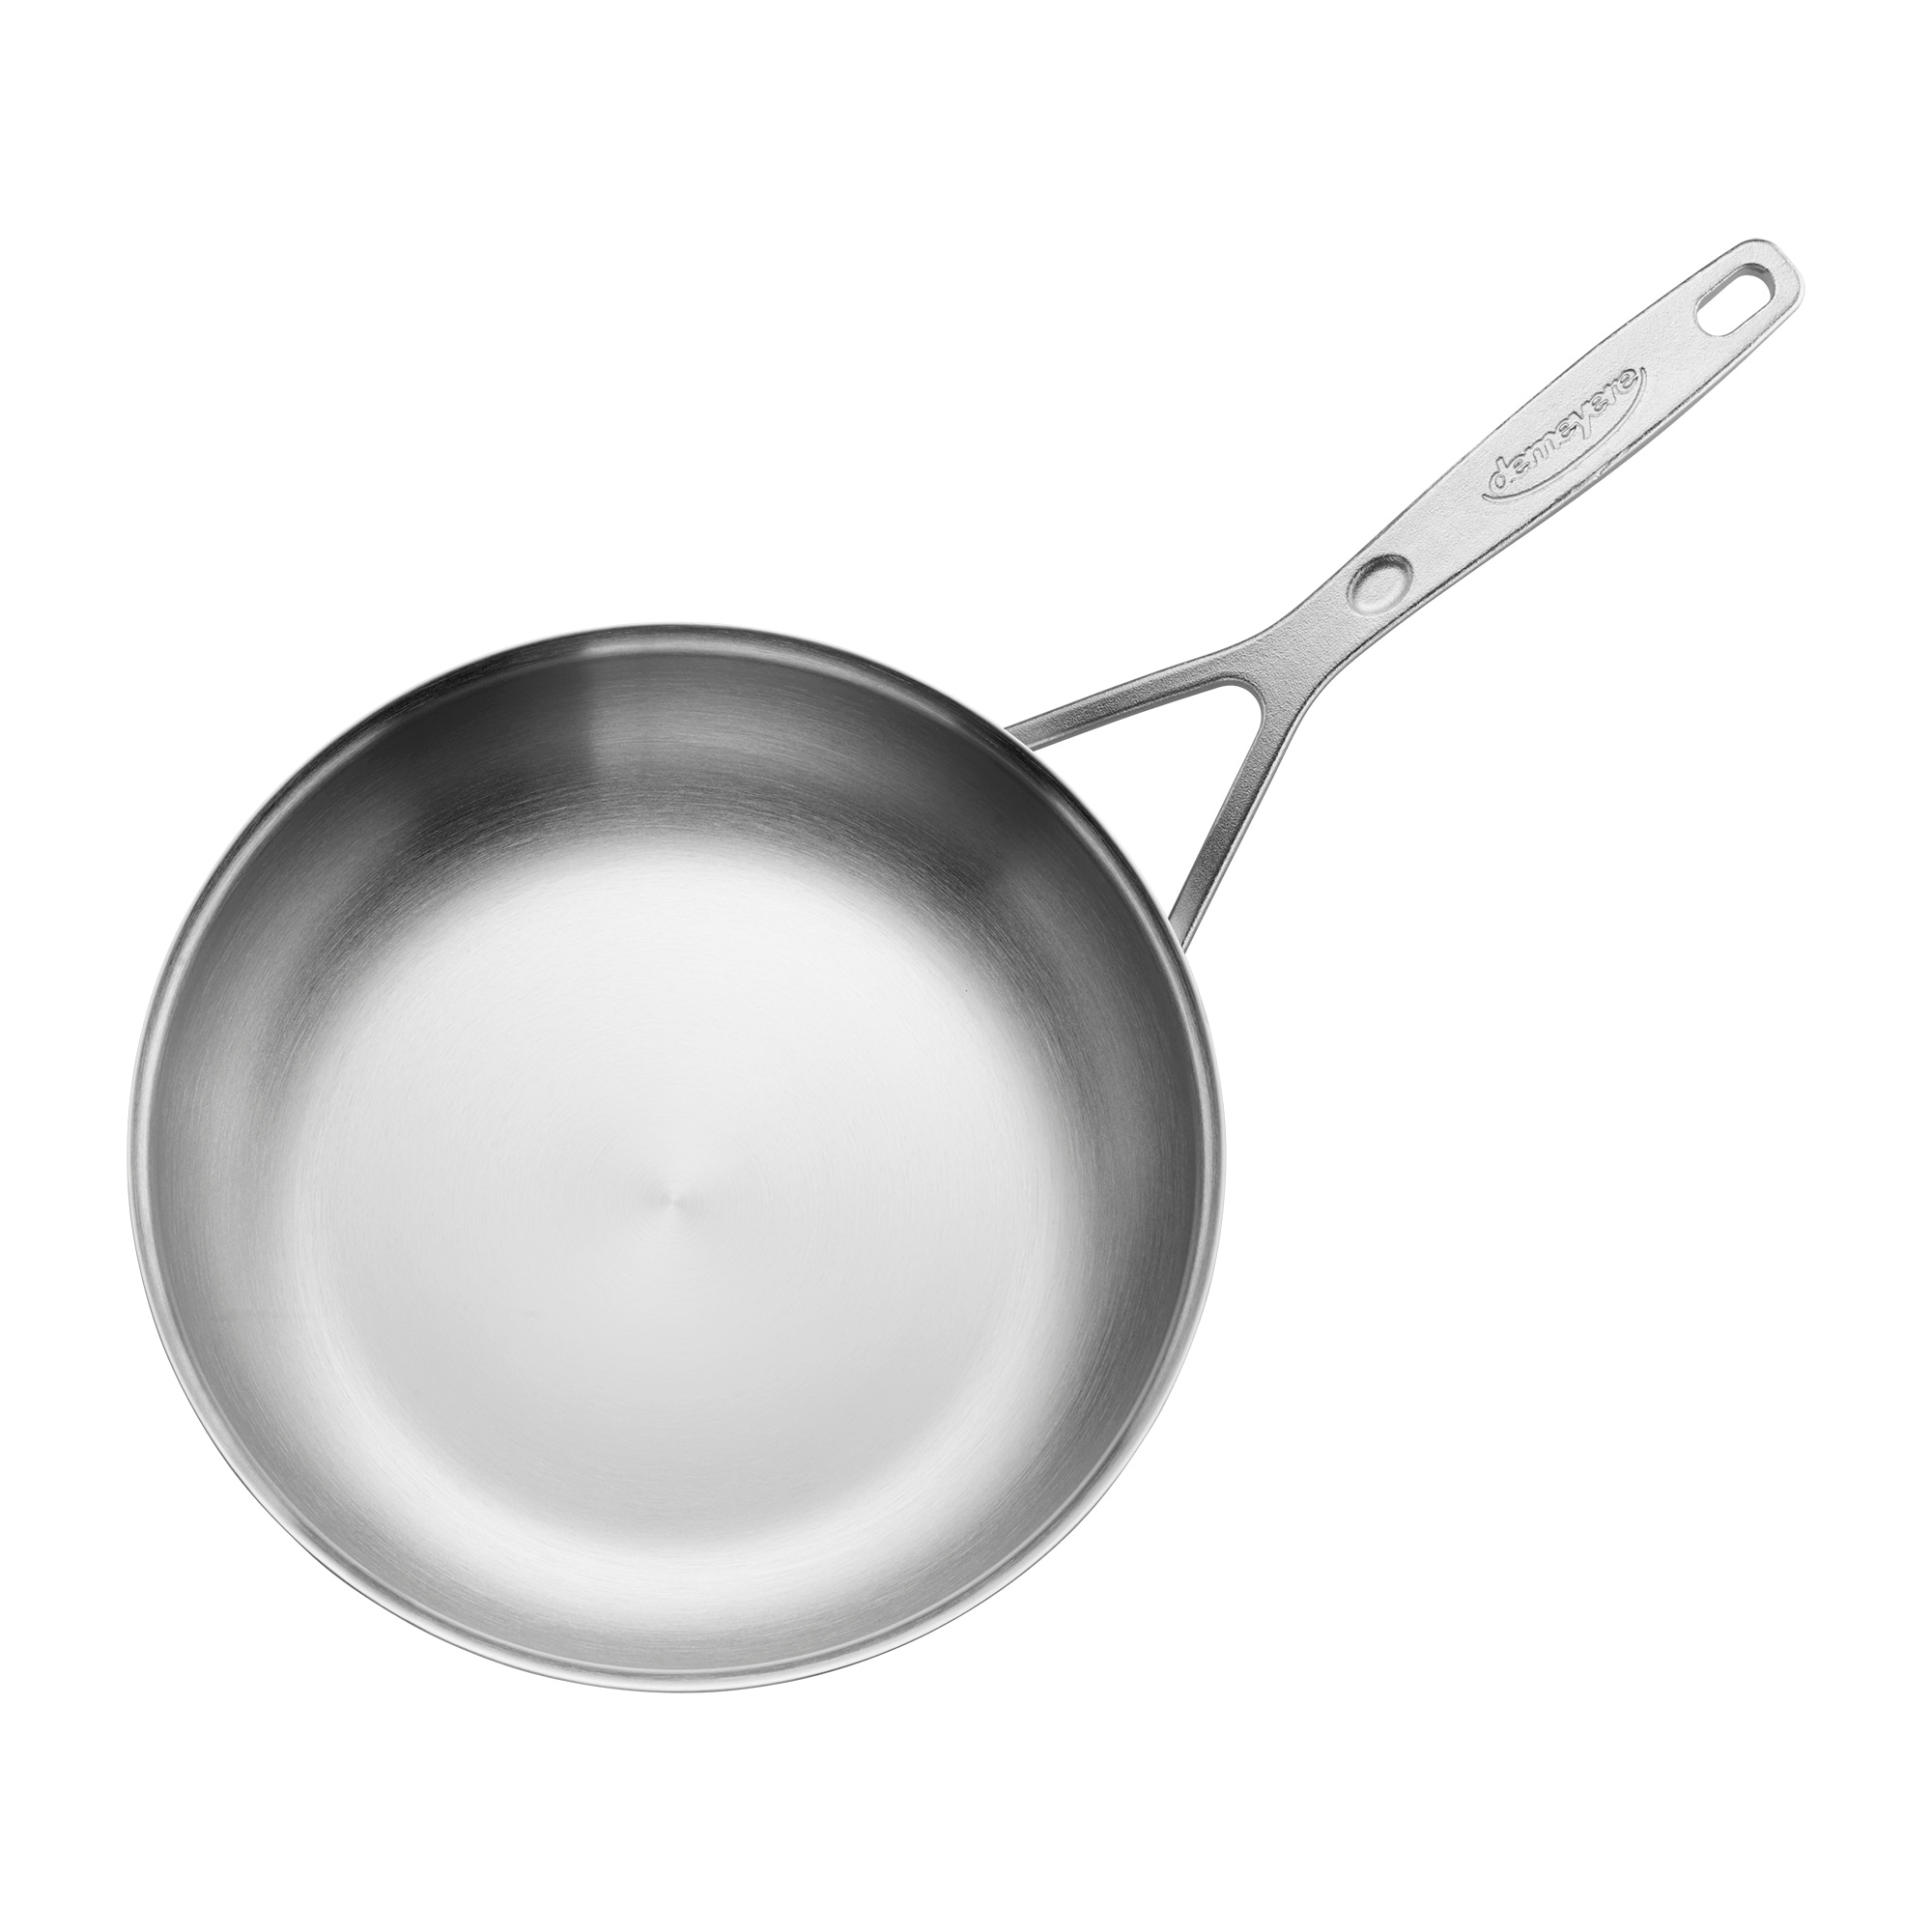 https://ak1.ostkcdn.com/images/products/is/images/direct/8c2cdeea10f20562c3a22b88be67c3060f226c2d/Demeyere-Industry-5-Ply-Stainless-Steel-Fry-Pan.jpg